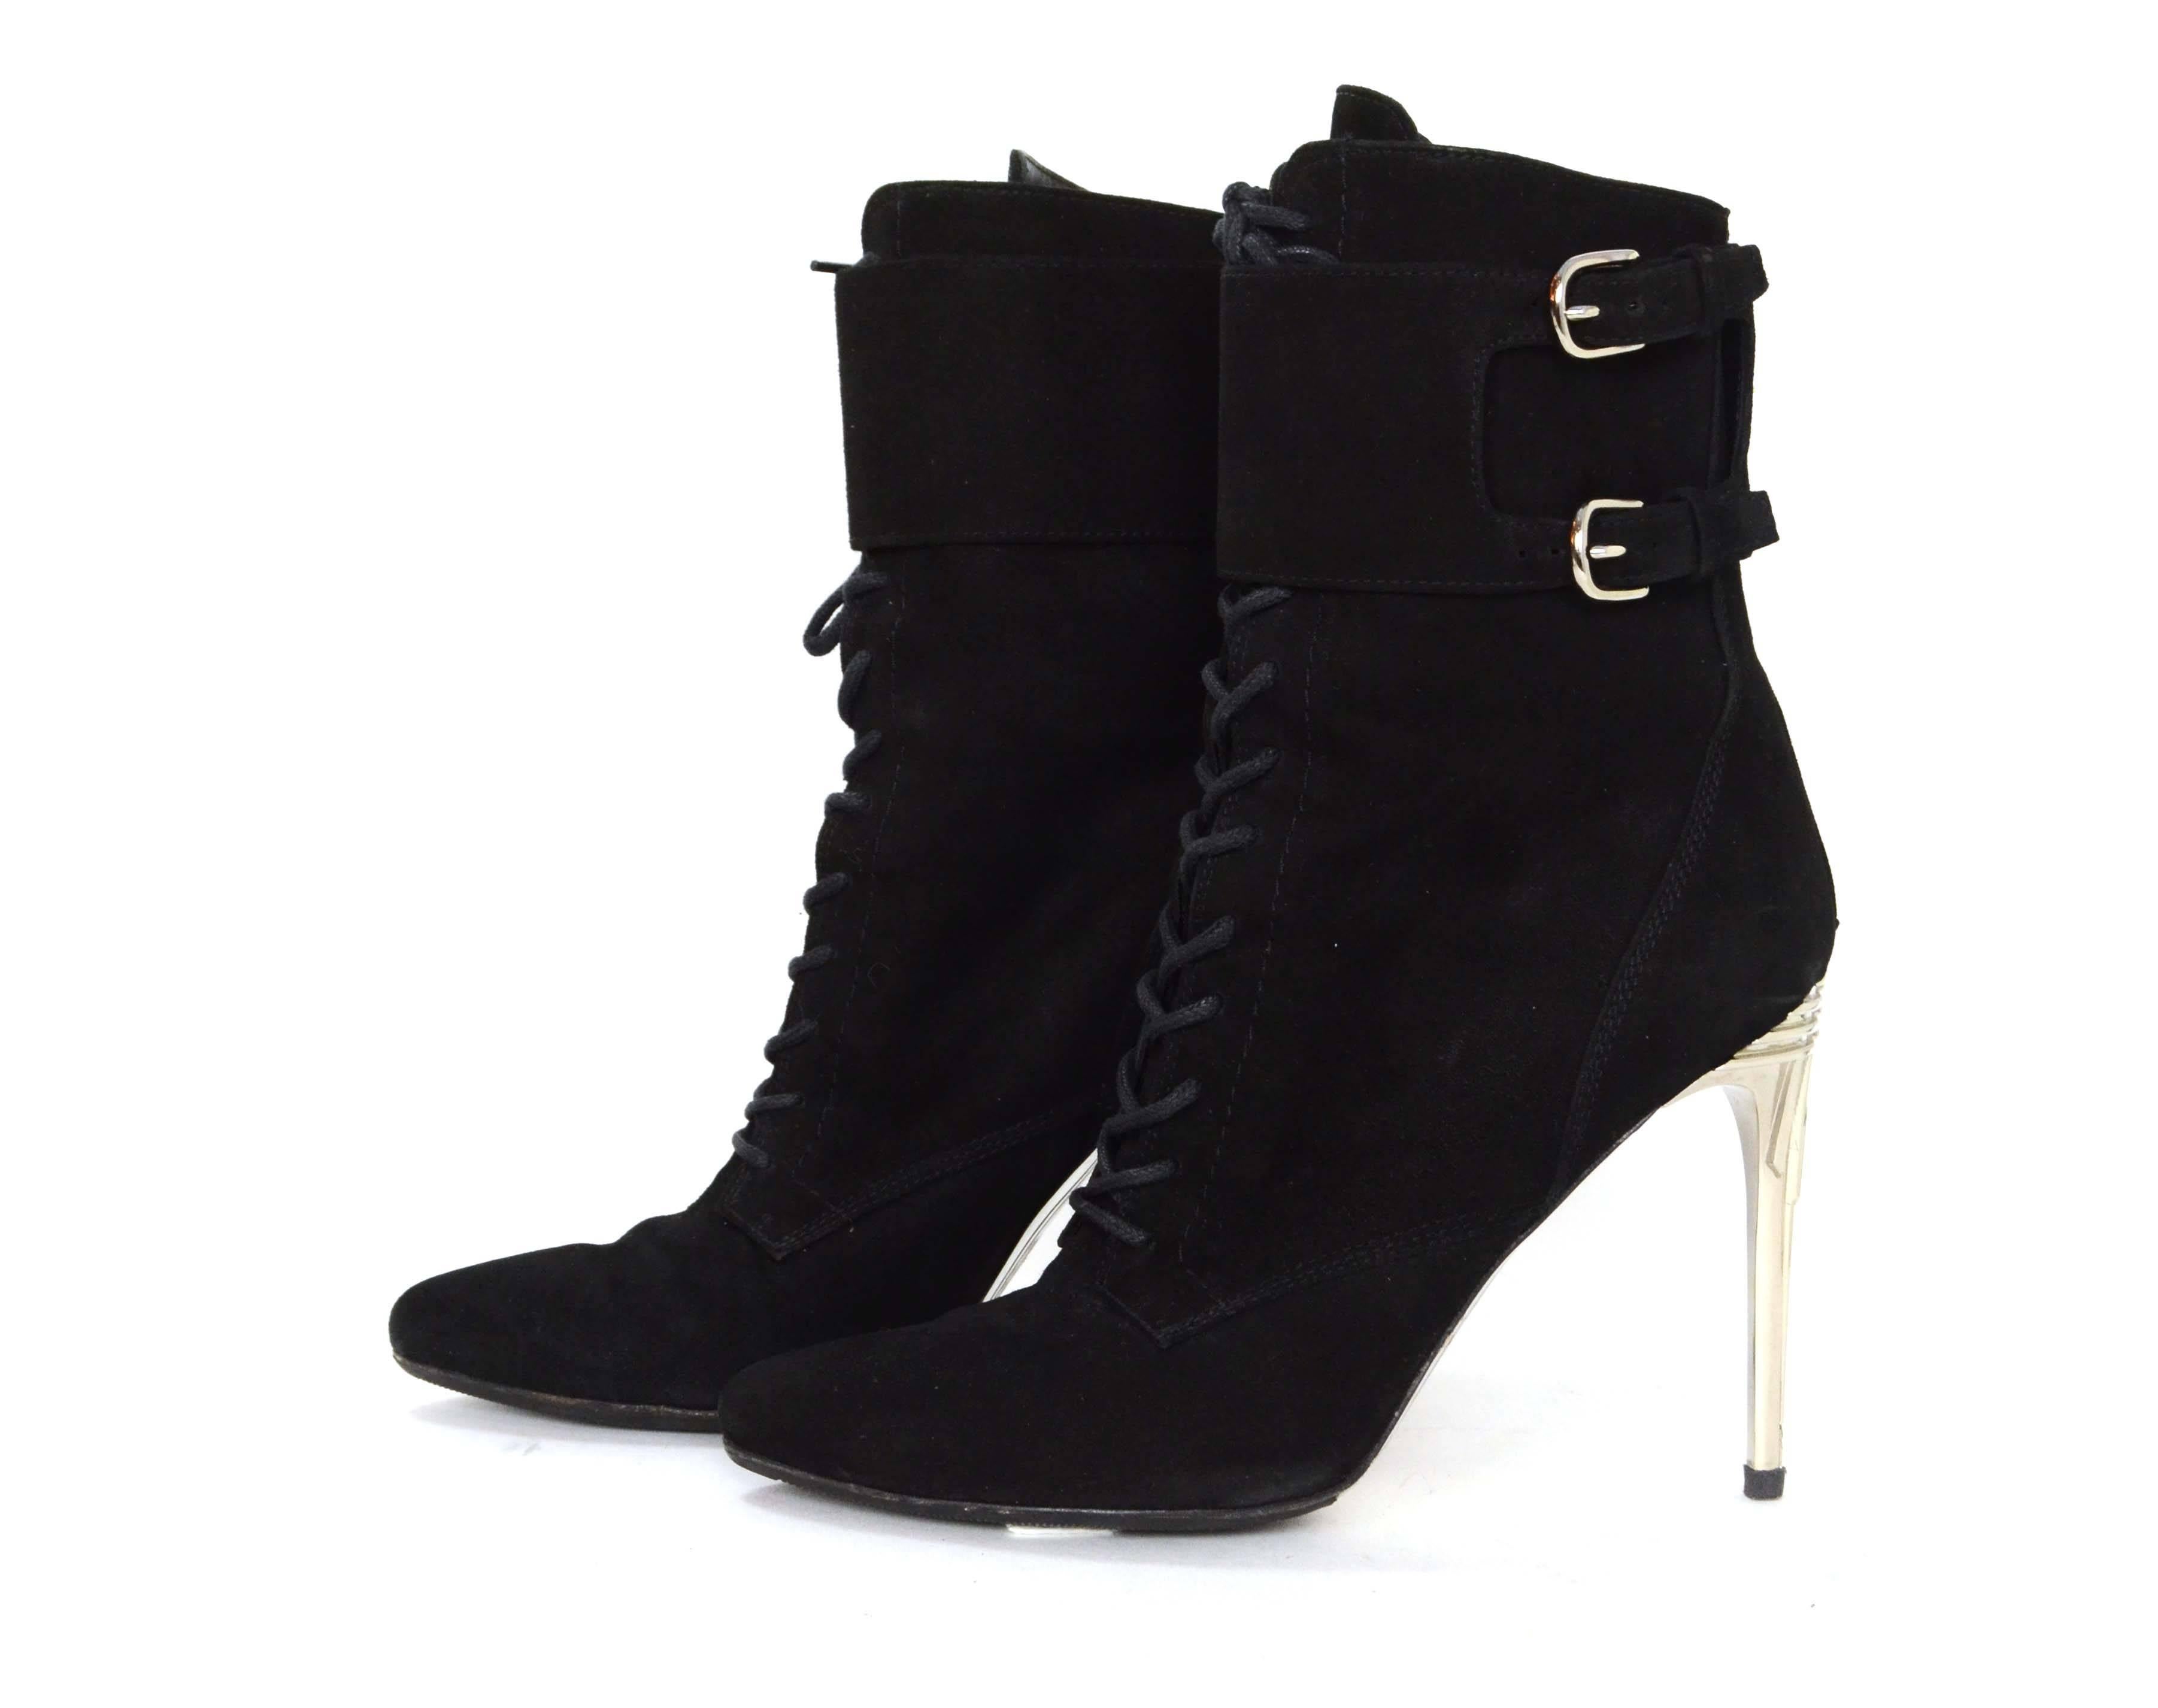 Balmain Black Suede Lace Up Booties 
Features silvertone metal detailed heels
Made In: France
Color: Black and silver
Materials: Suede and metal
Closure/Opening: Back zipper and lace up front
Sole Stamp: Balmain Made in France 40
Overall